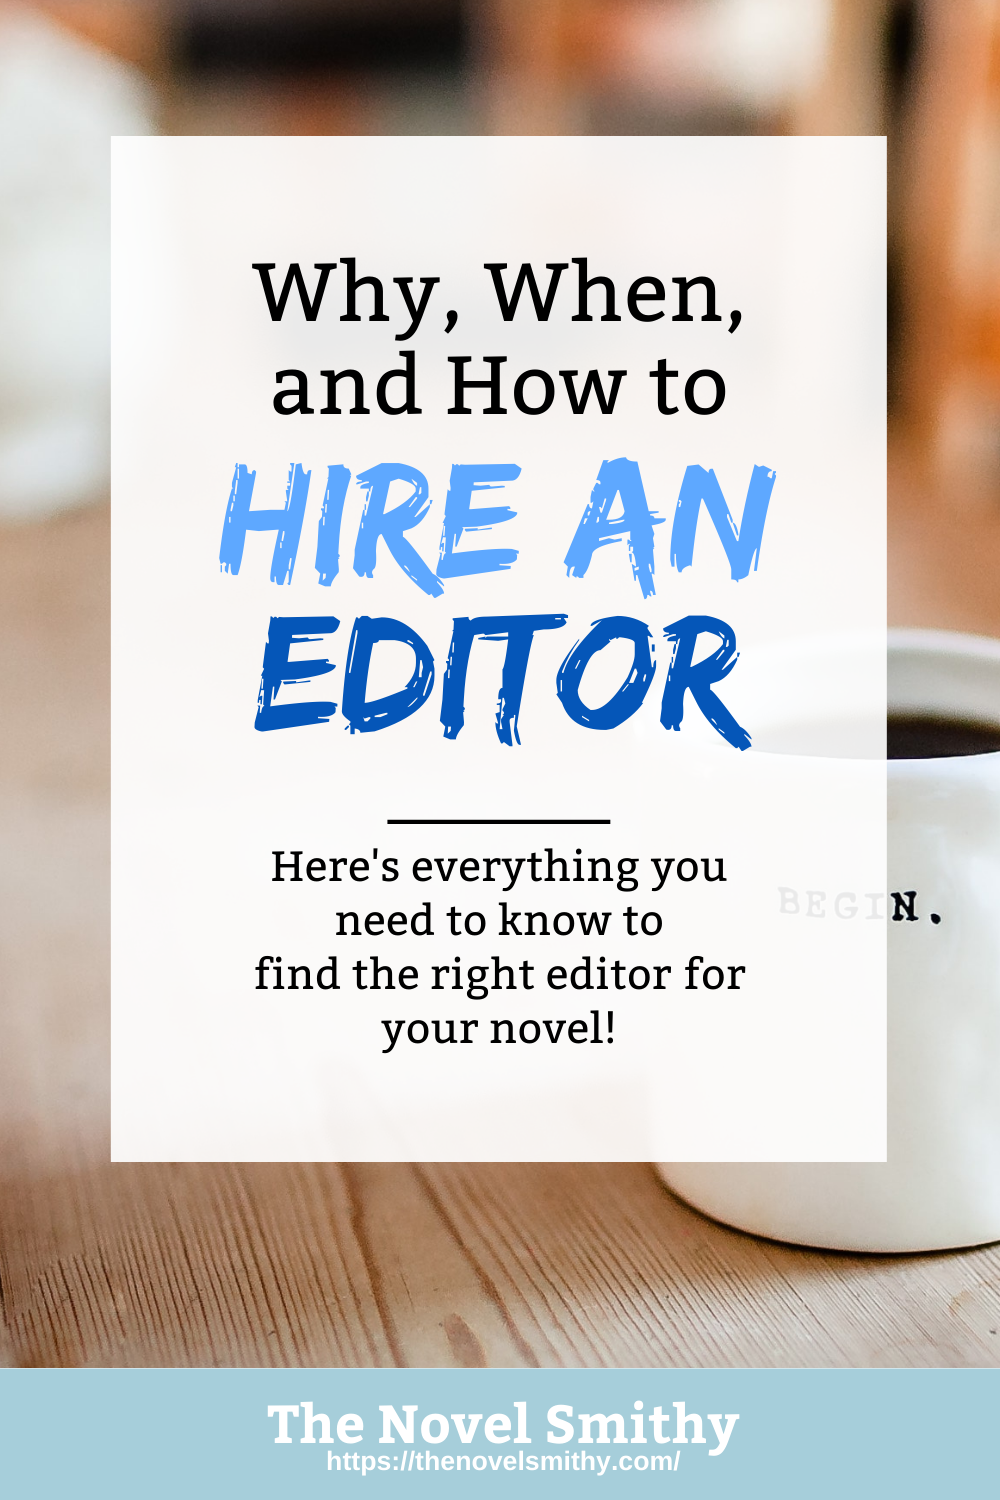 Why, When, and How to Hire an Editor